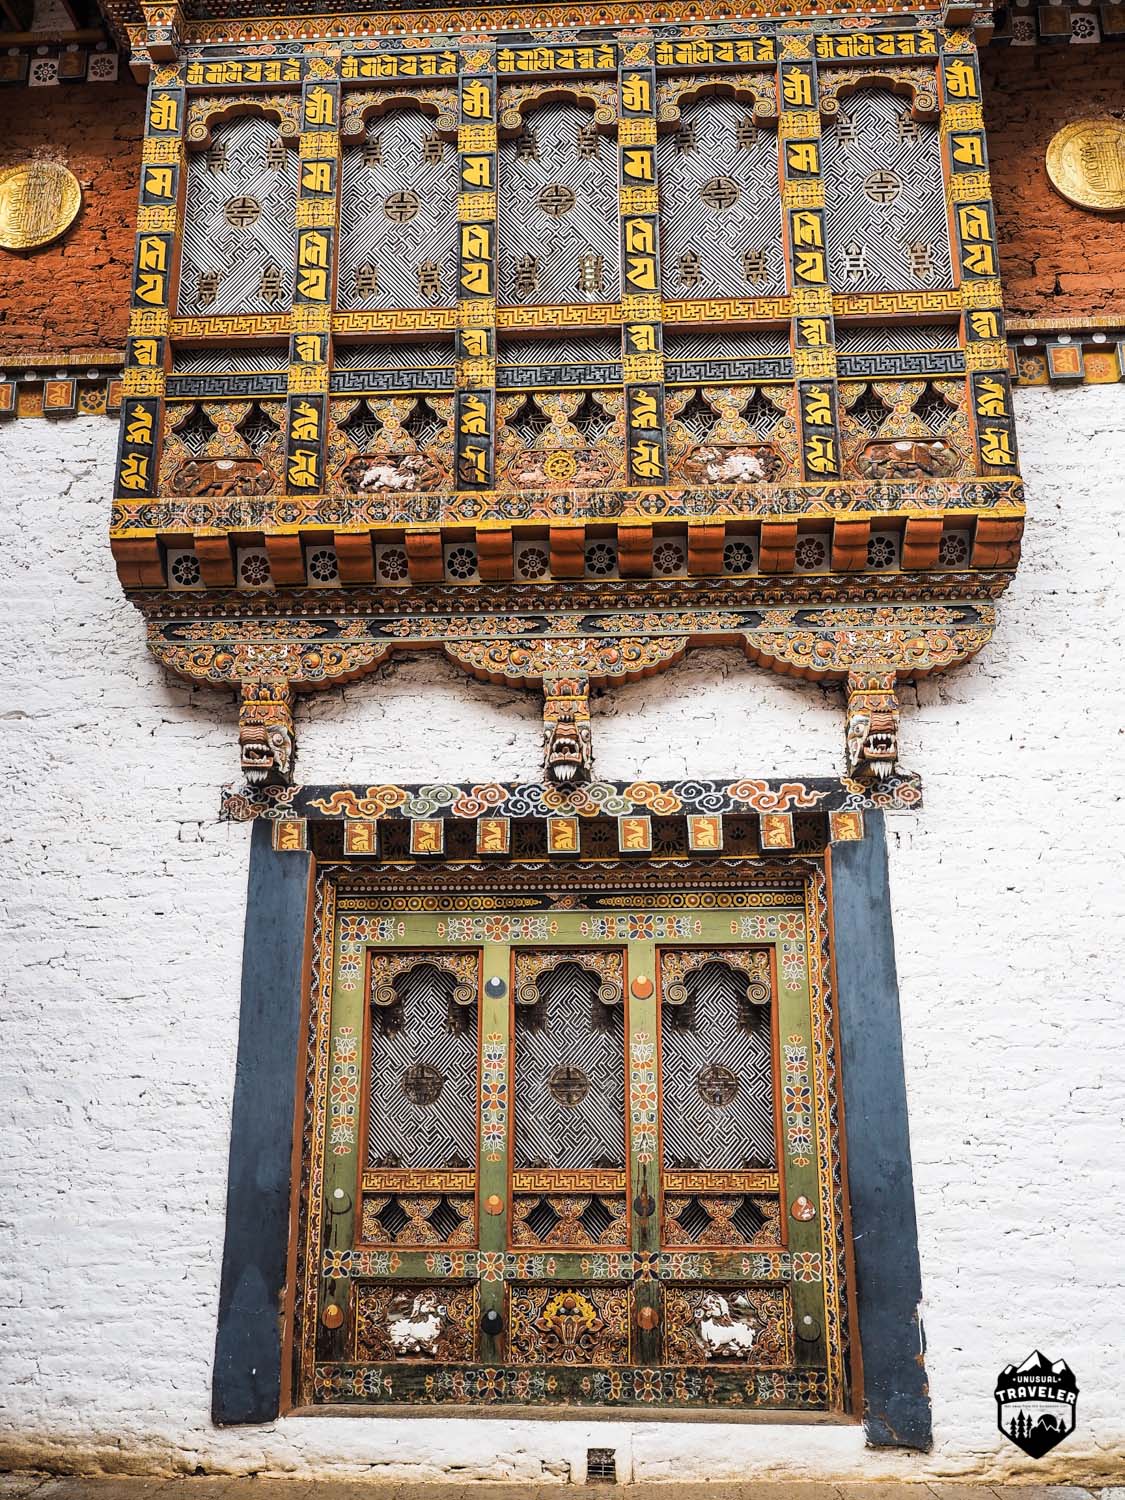 The most impressive wood frames in the world? Made completely without help of modern tools inside Punakha Dzong.